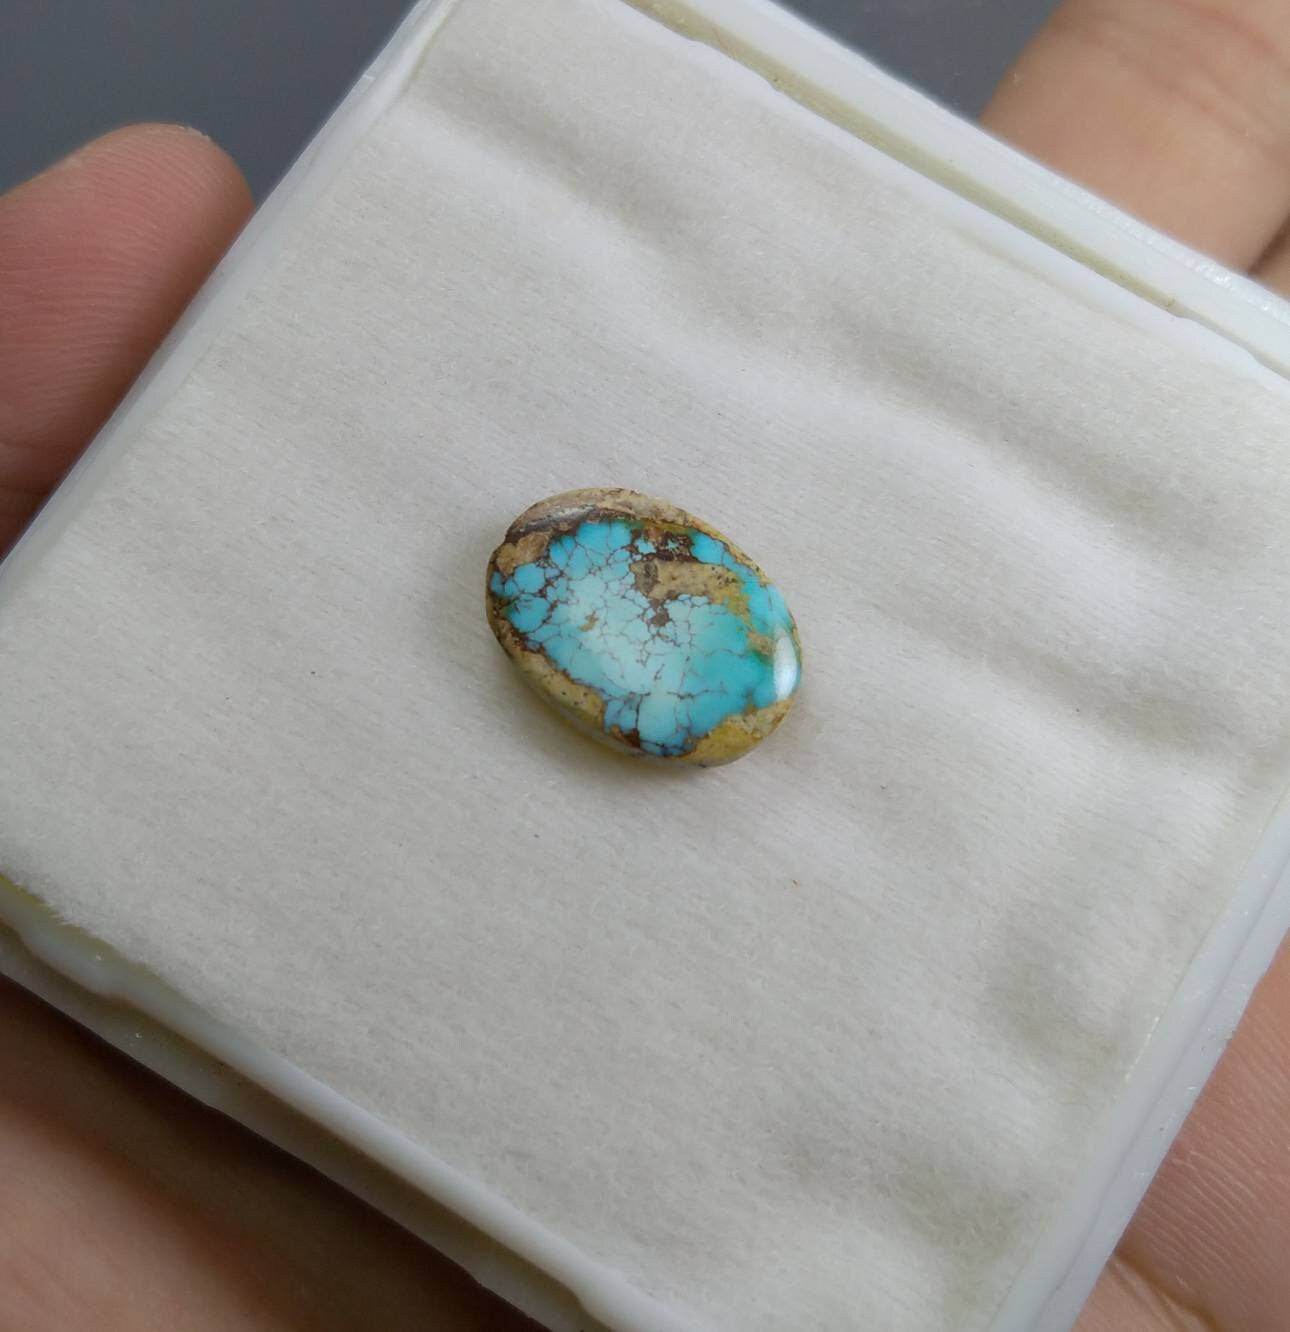 ARSAA GEMS AND MINERALSNatural good quality beautiful 5.5 carat oval shape untreated unheated turquoise cabochon - Premium  from ARSAA GEMS AND MINERALS - Just $6.00! Shop now at ARSAA GEMS AND MINERALS